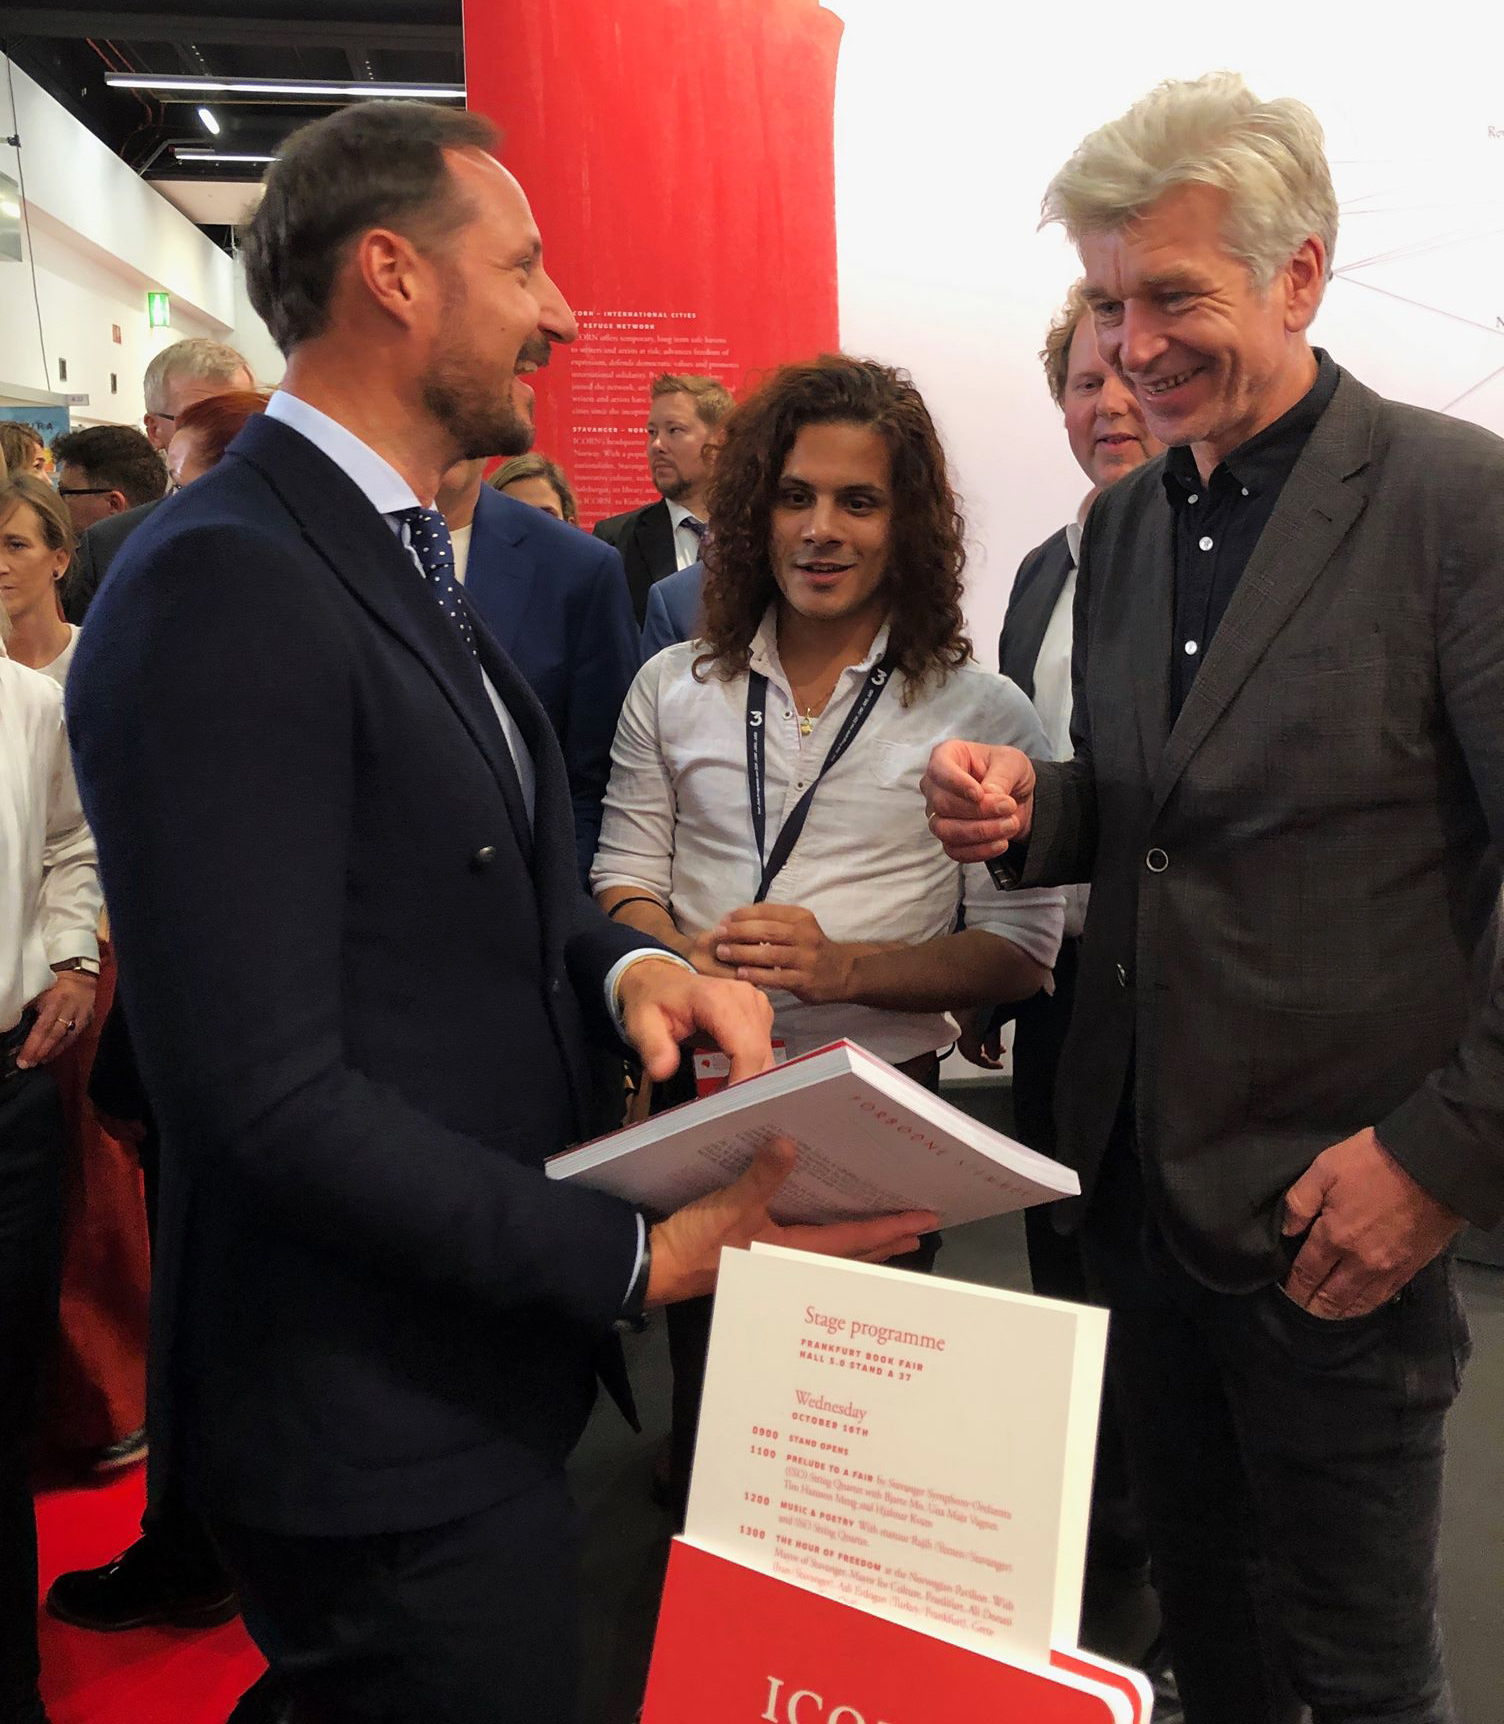 The Crown Prince of Norway, Haakon Magnus, was given a copy of Forbidden Voices by Karl Ove Knausgård while visiting the ICORN stand pre-launch of the book. He met cartoonist Ali Dorani, aka Mr. Eaten Fish, who told his own story about his 4 years in an Australian run detention camp in Manus Island. Photo. 